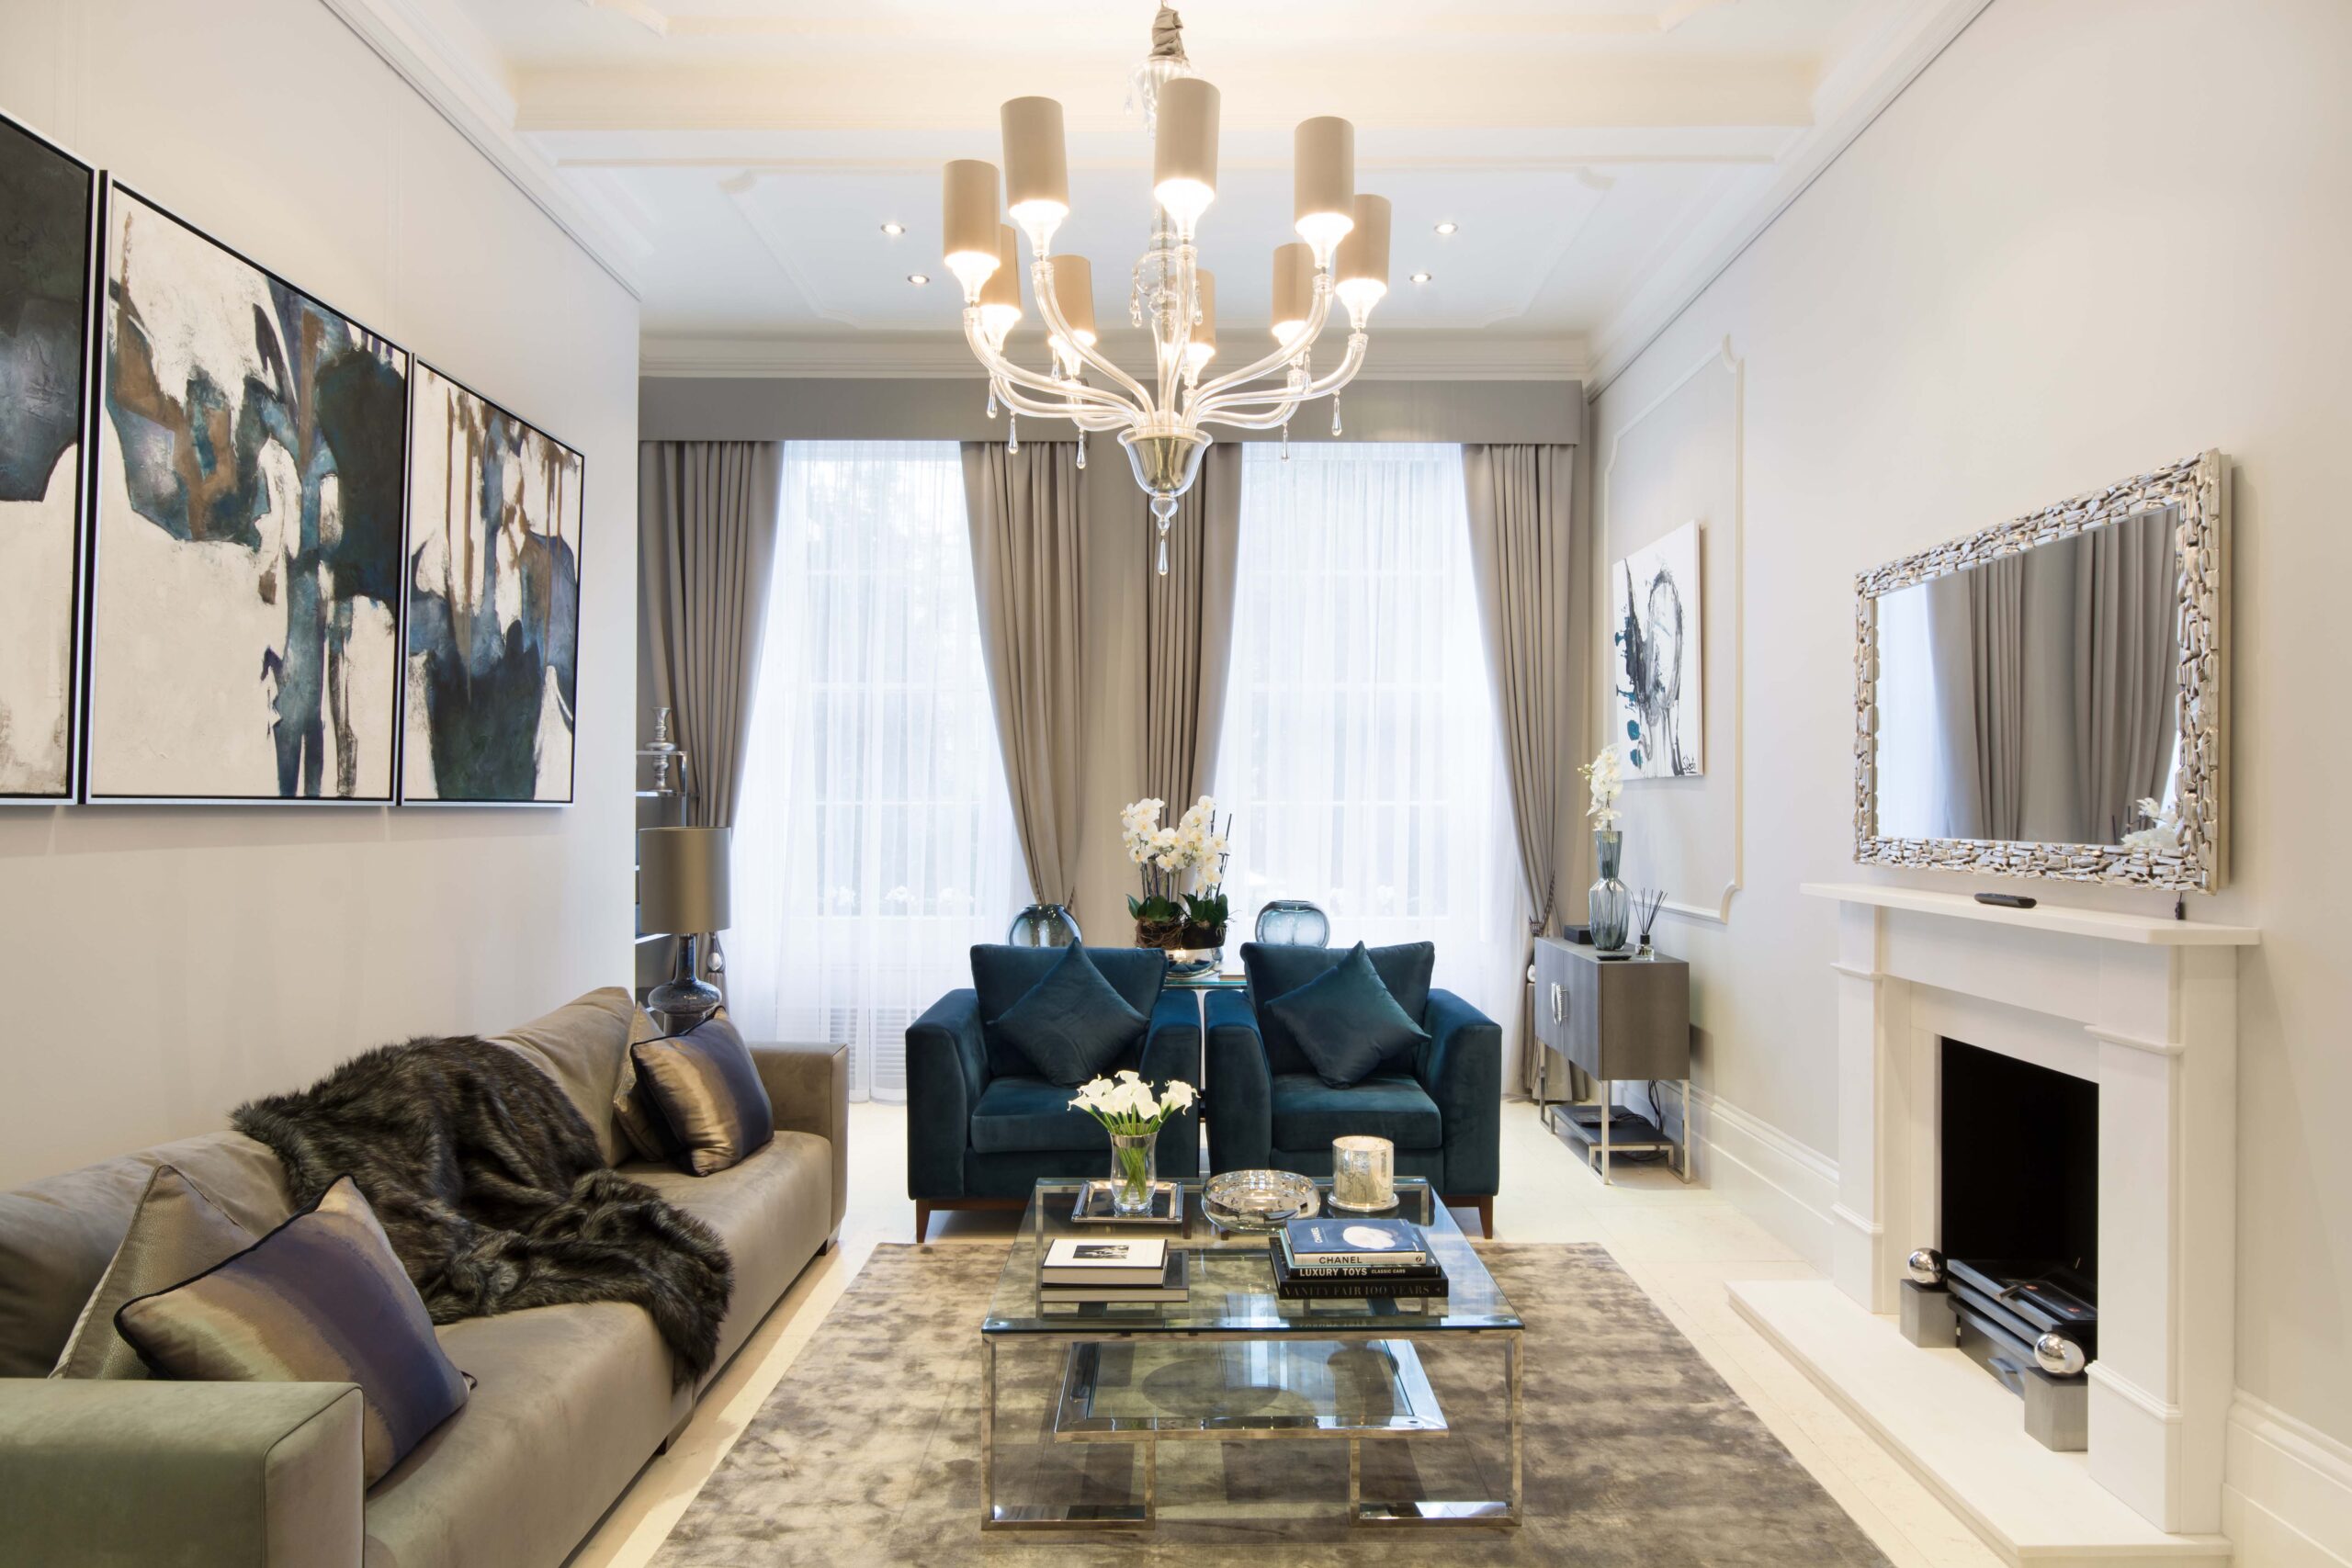 Luxuriously styled living room of an elegant maisonette for rent in Bayswater